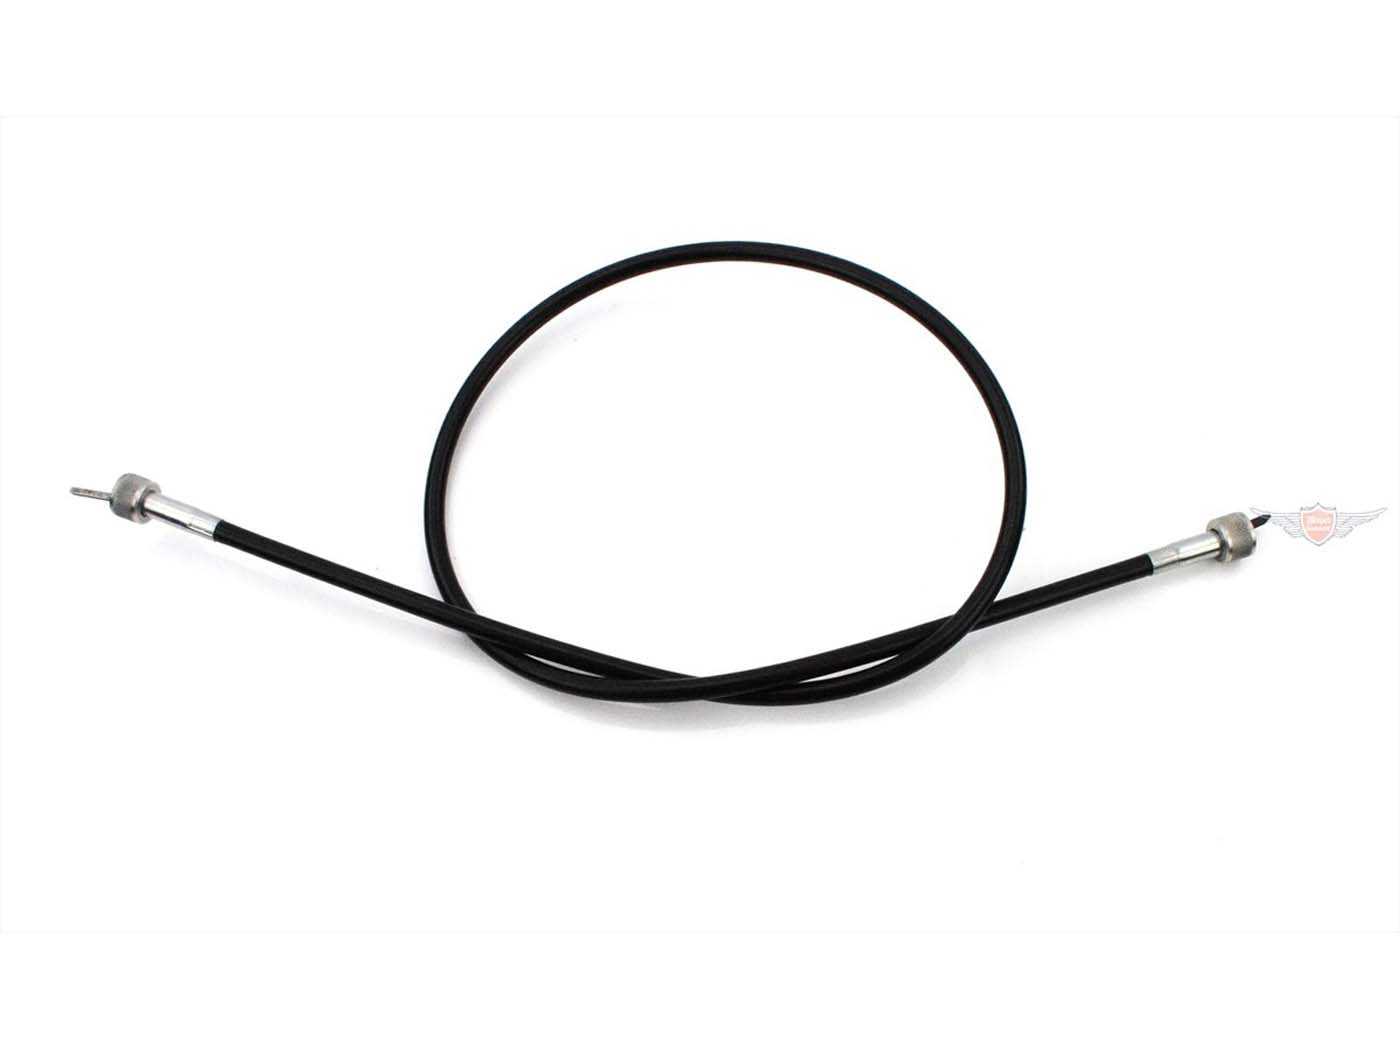 Speedometer Cable 750mm Black For Sachs Saxy Moped